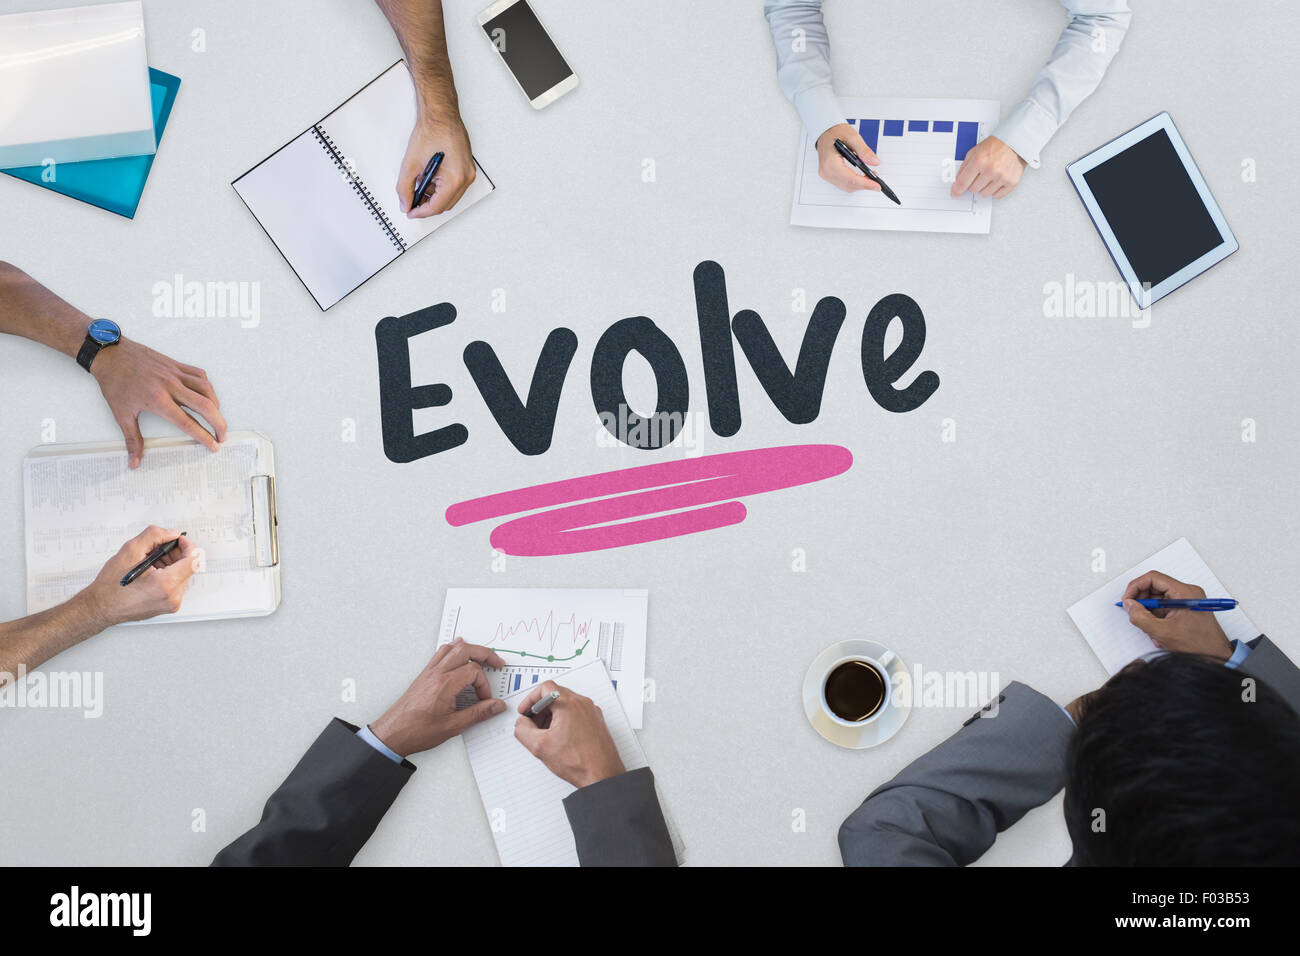 Evolve against business meeting Stock Photo